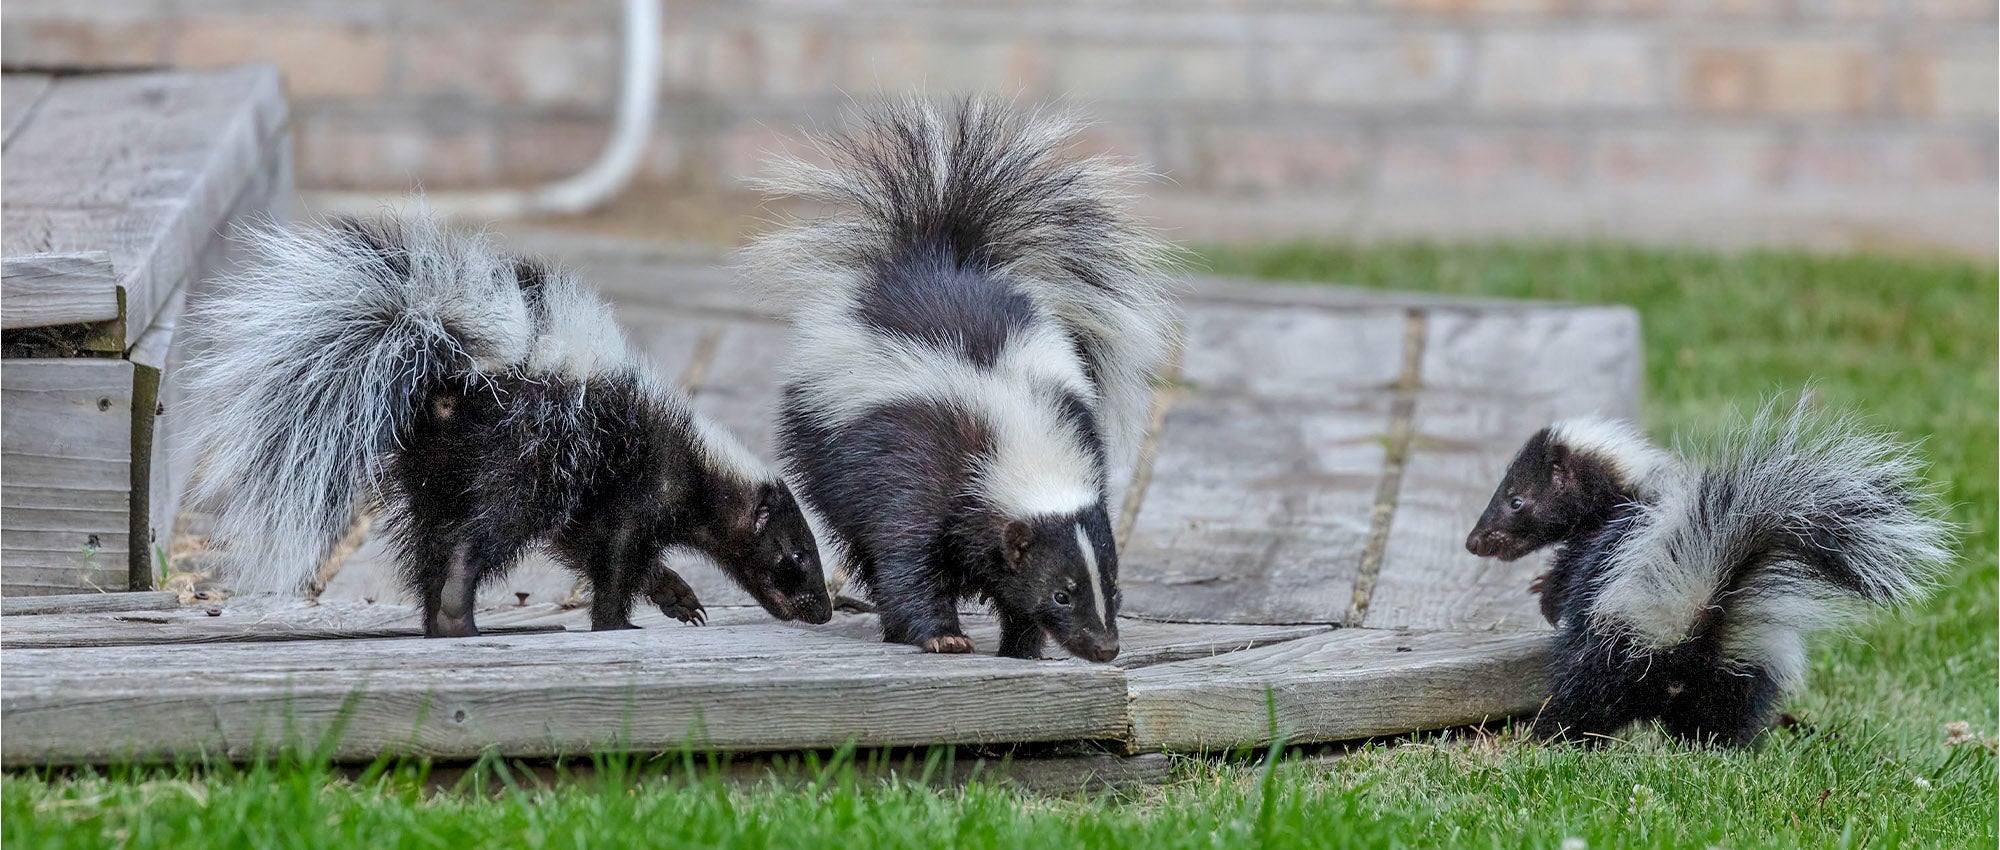 What to do about skunks | The Humane Society of the United States